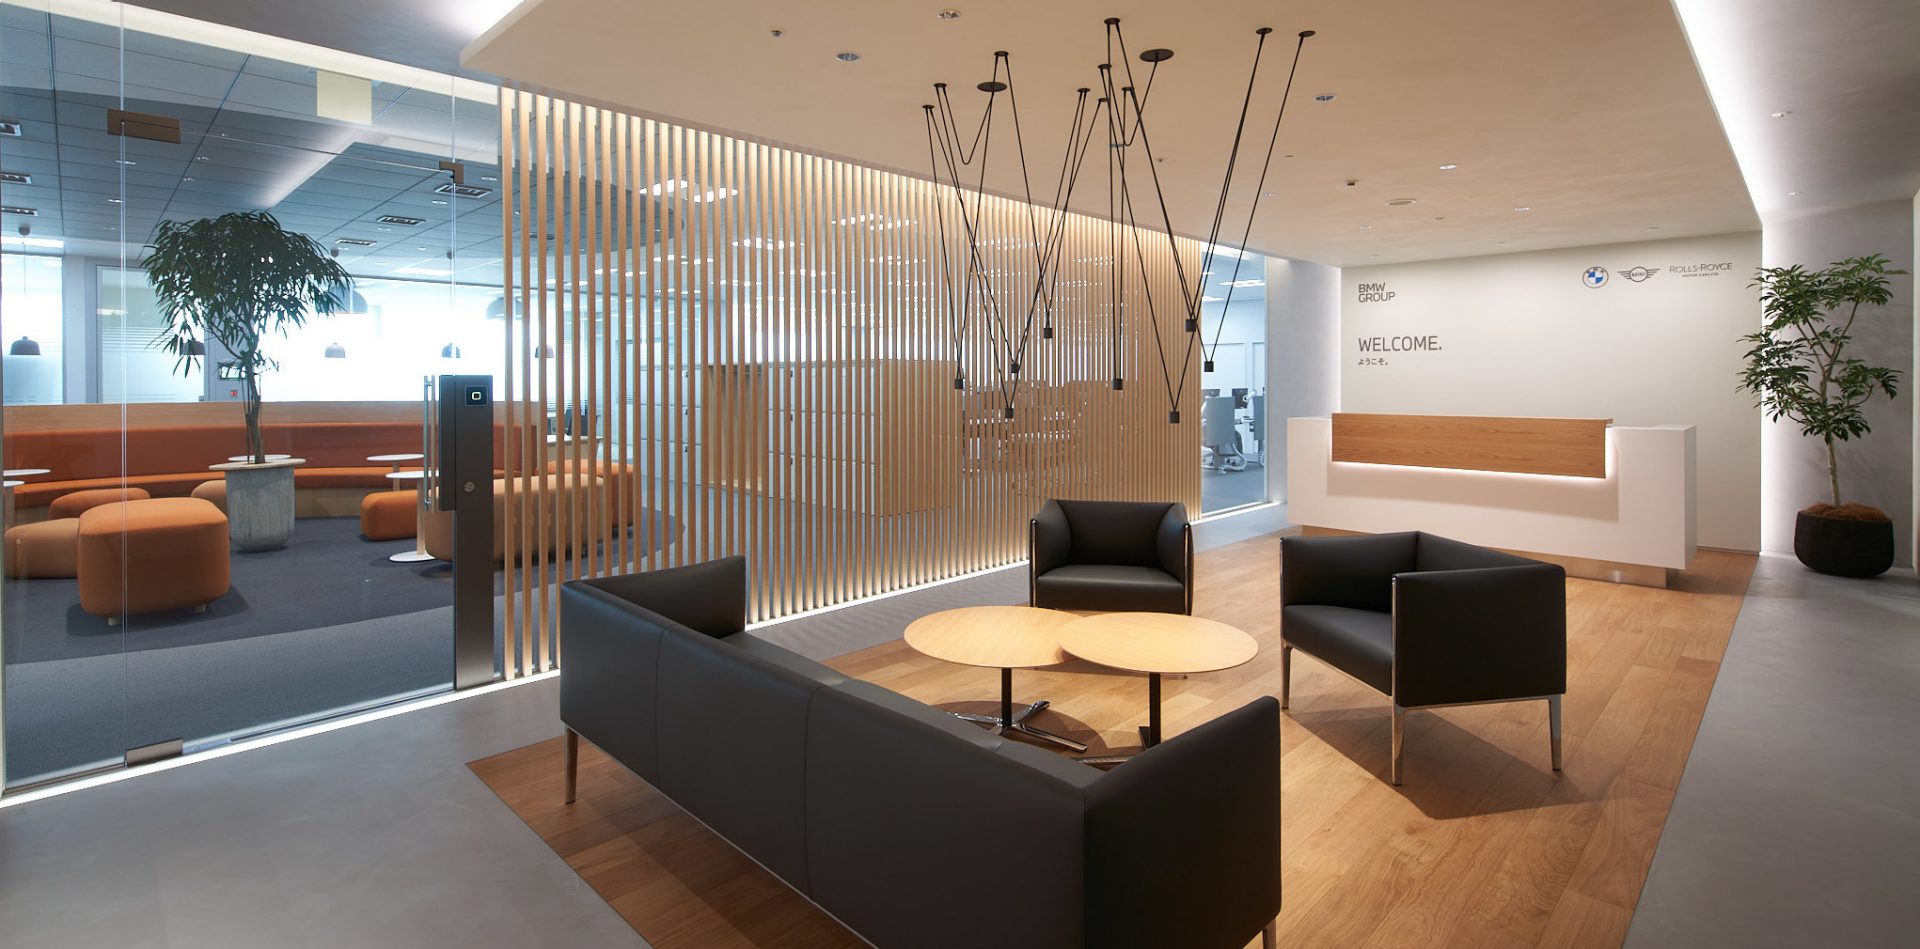 BMW Group Japan open meeting space.